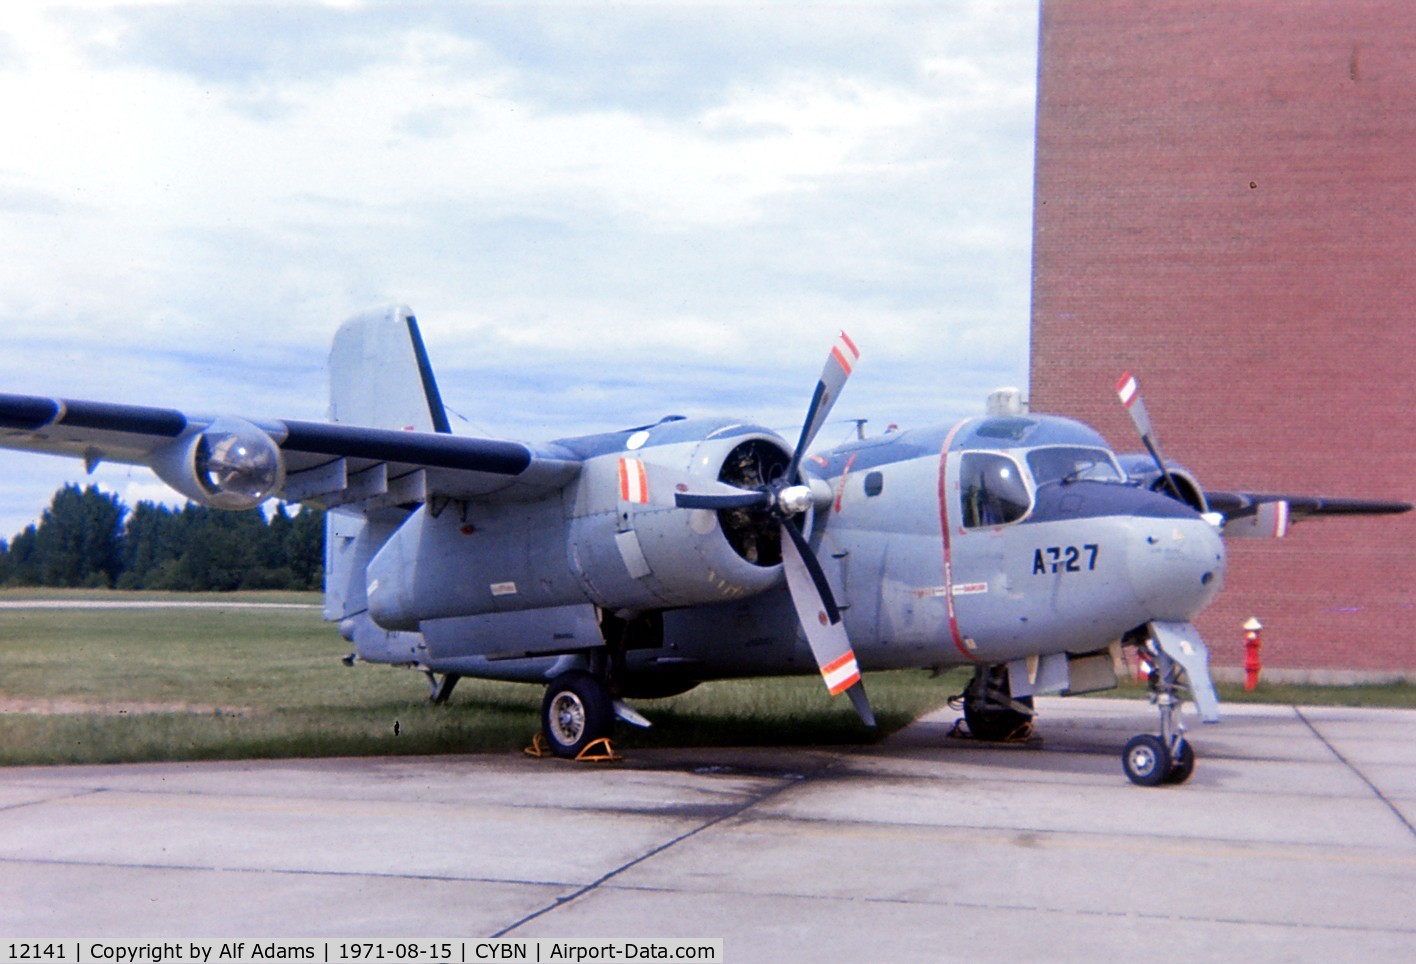 12141, De Havilland Canada CP-121 Tracker C/N DHC40, CP-121 Tracker 12141 shown at Canadian Forces Base Borden, Ontario in August 1971 when it carried the number A727 and was in use as an instructional airframe.